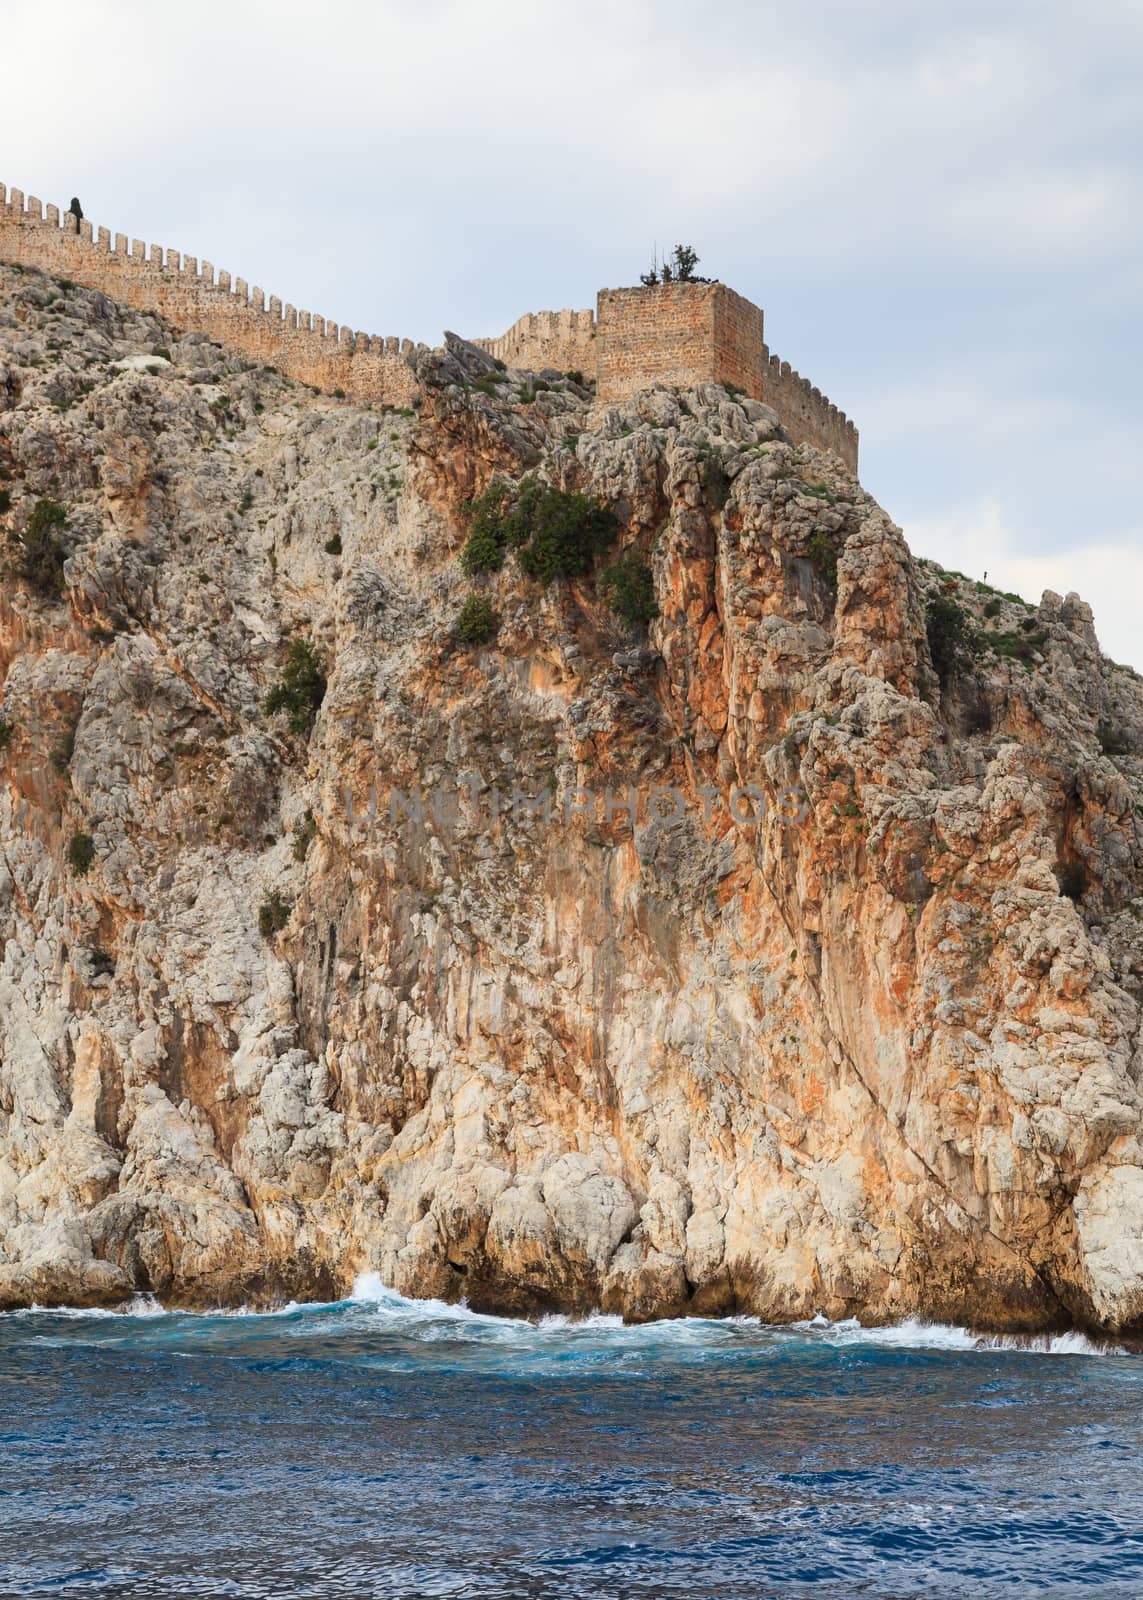 The fortified walls of Alanya Castle in Southern Turkey as viewed from the Mediterranean Sea.  The castle is located on a rocky peninsula and dates back to the 13th century.